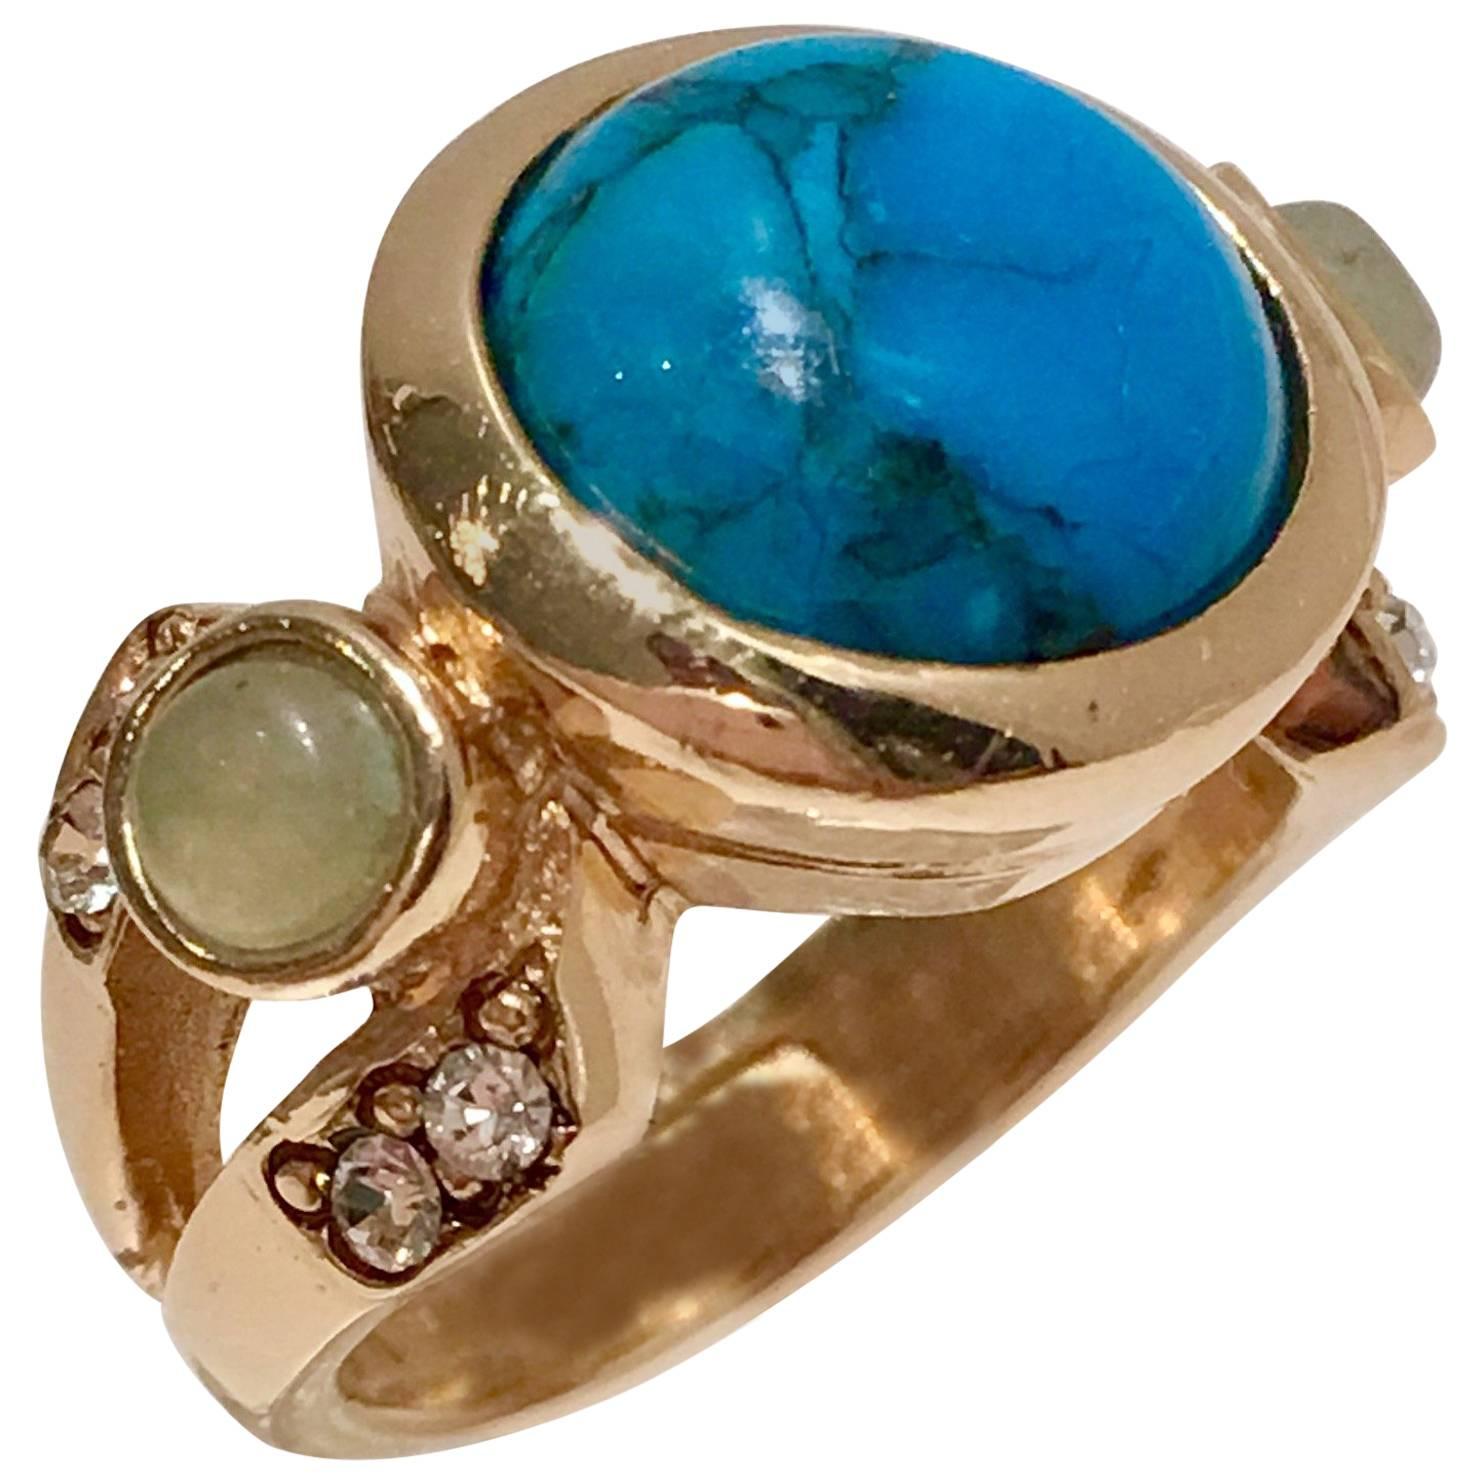 Judith Leiber Turquoise Aventurine & Gold Plate Cocktail Ring